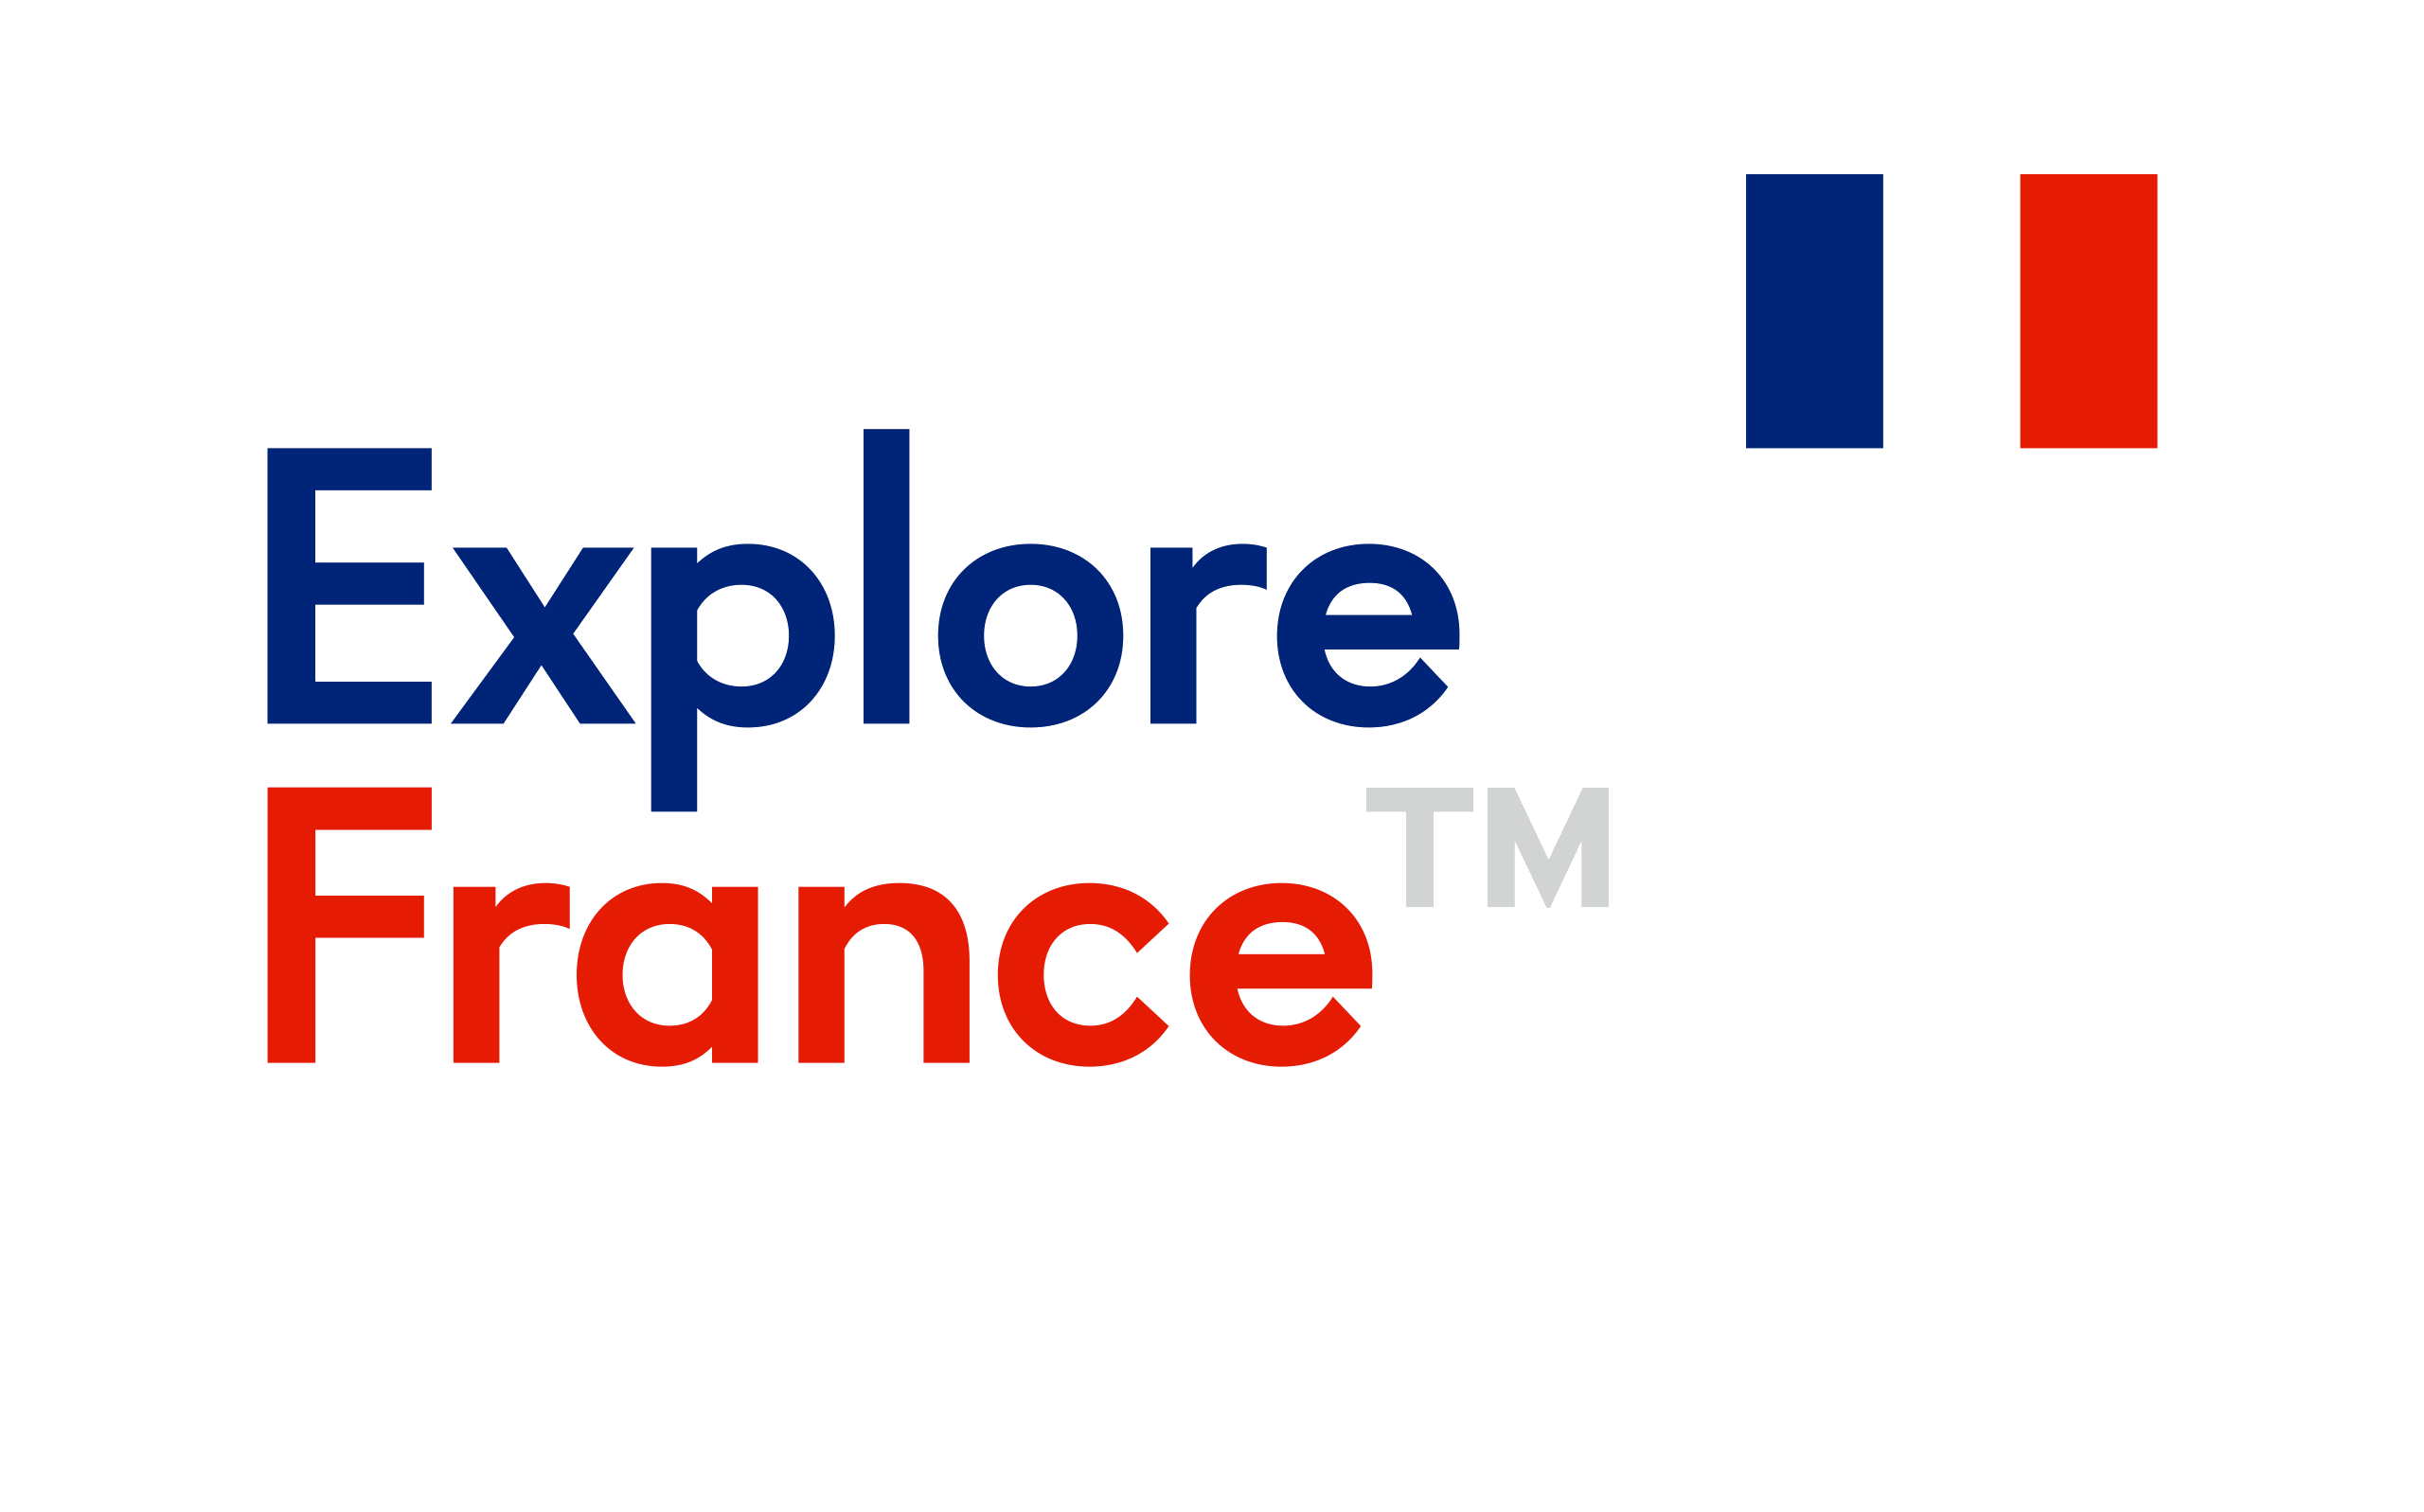 Link to the Explore France website